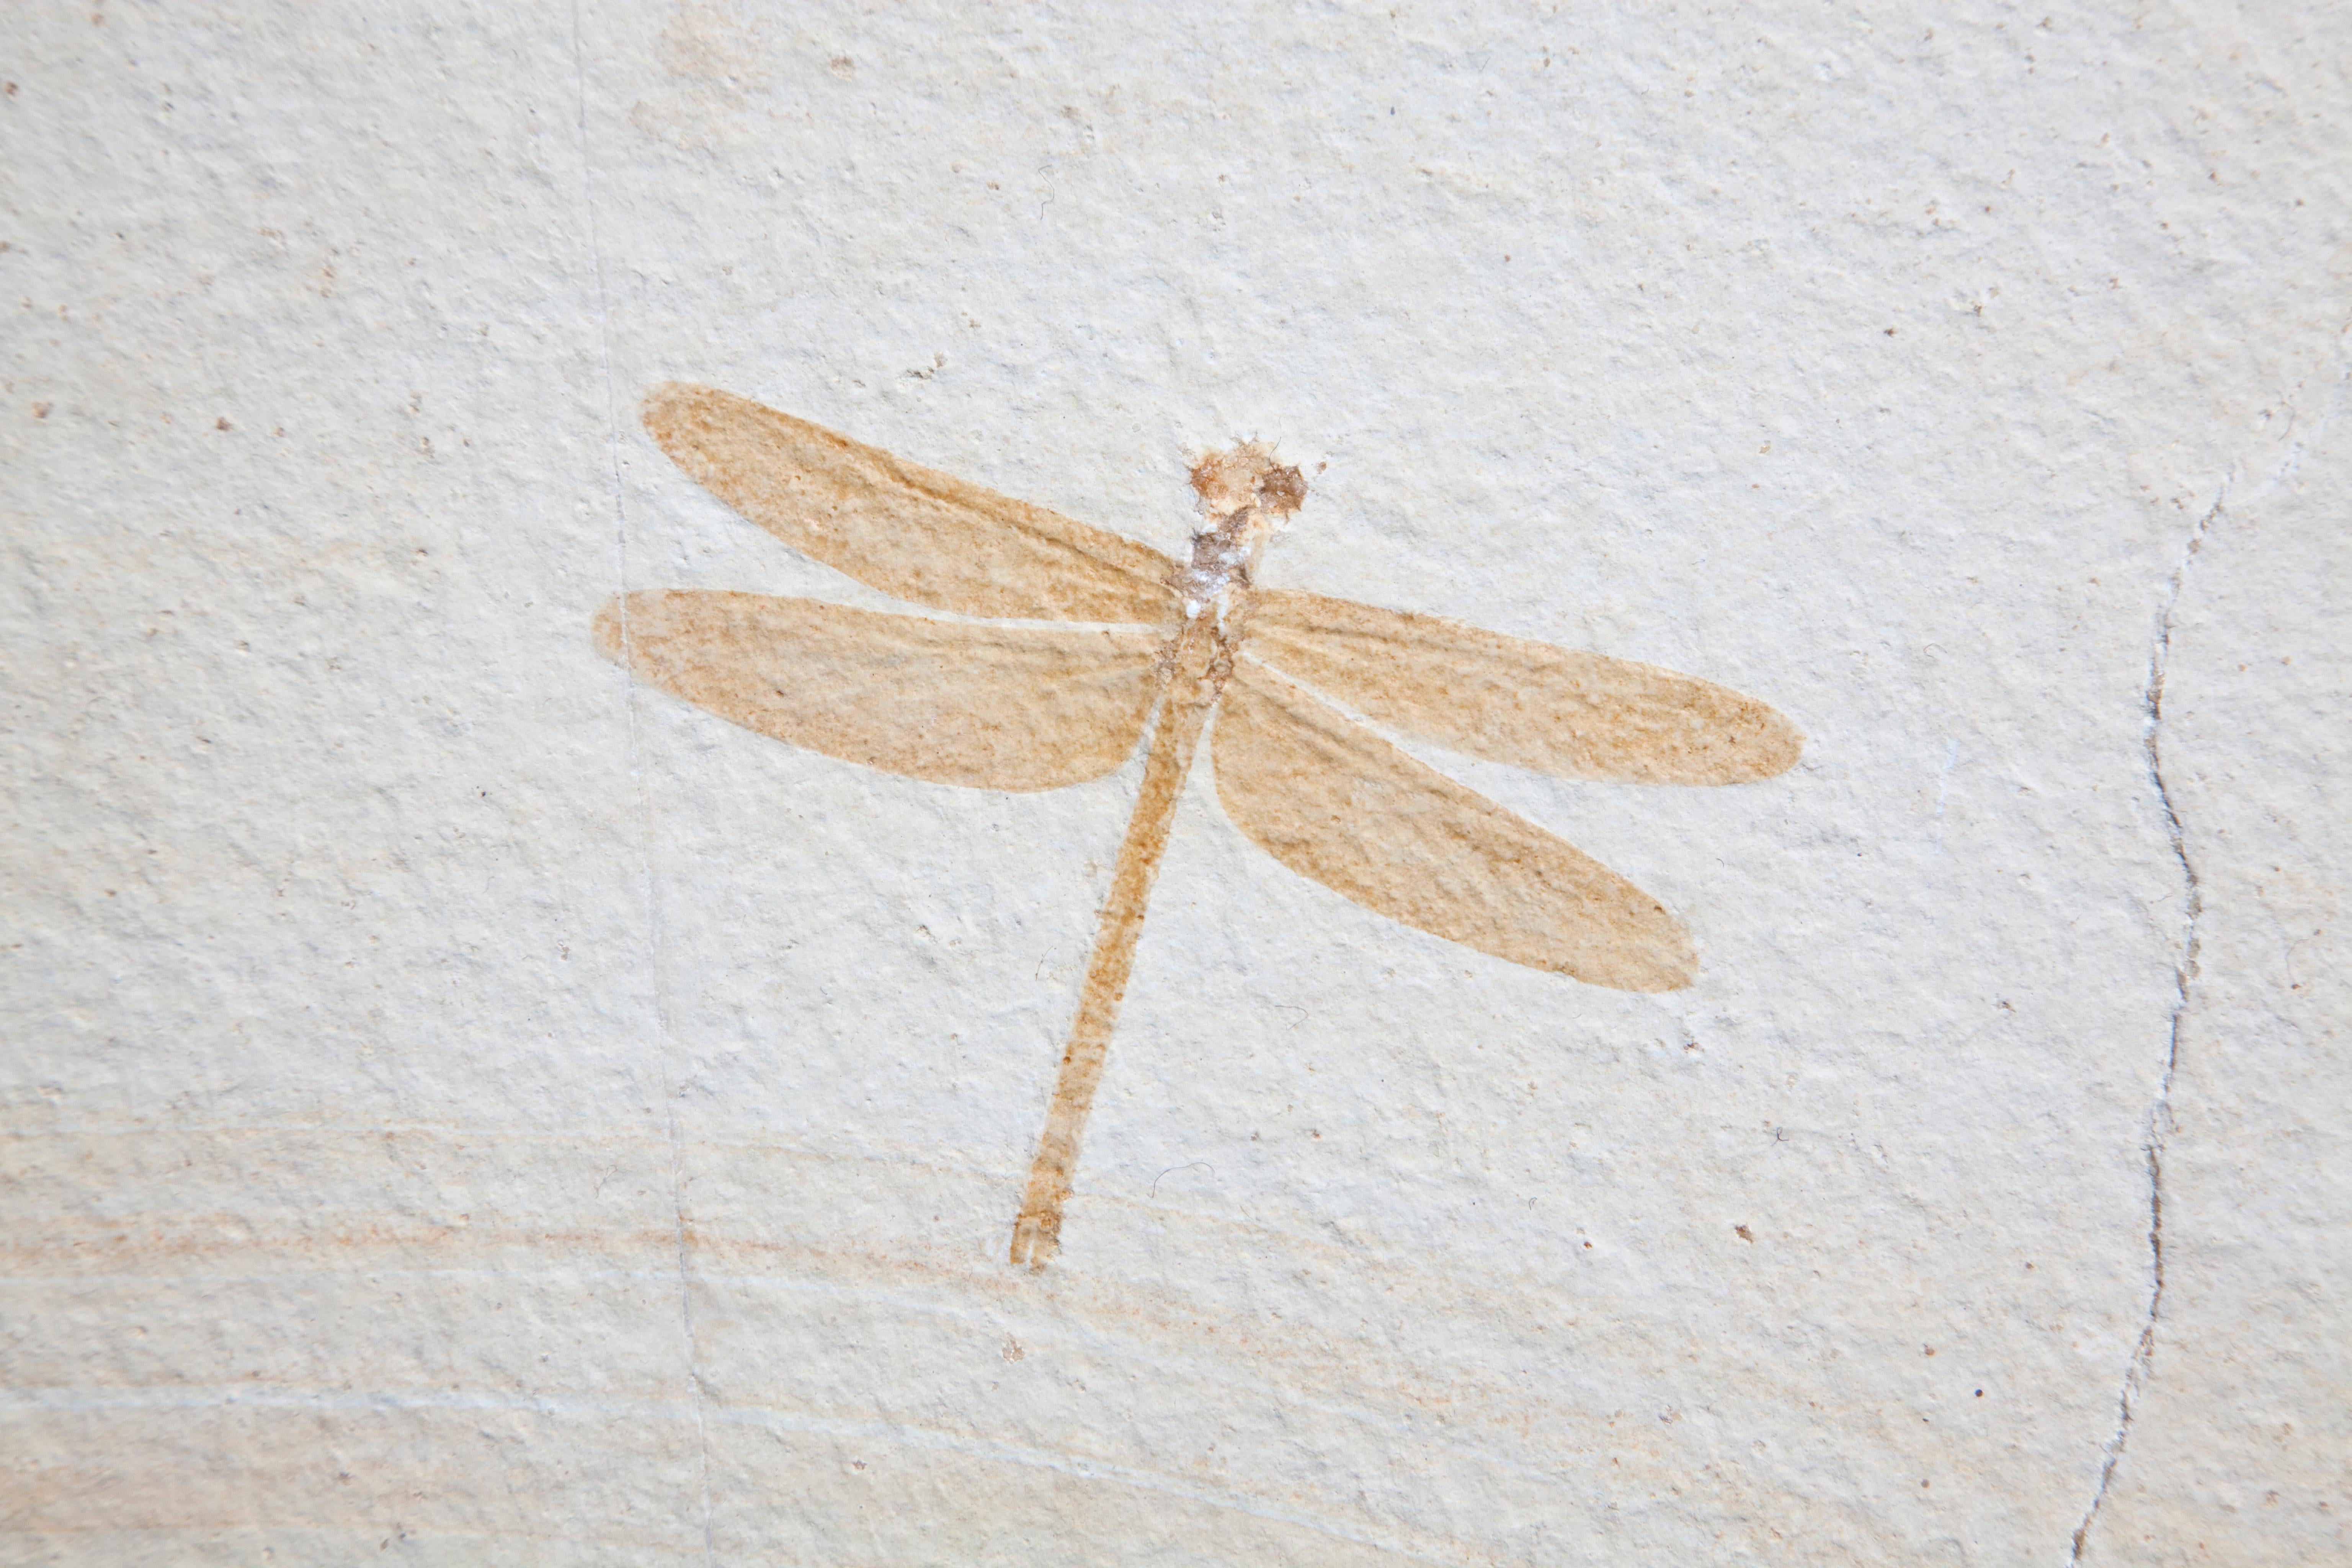 dragonfly fossil for sale